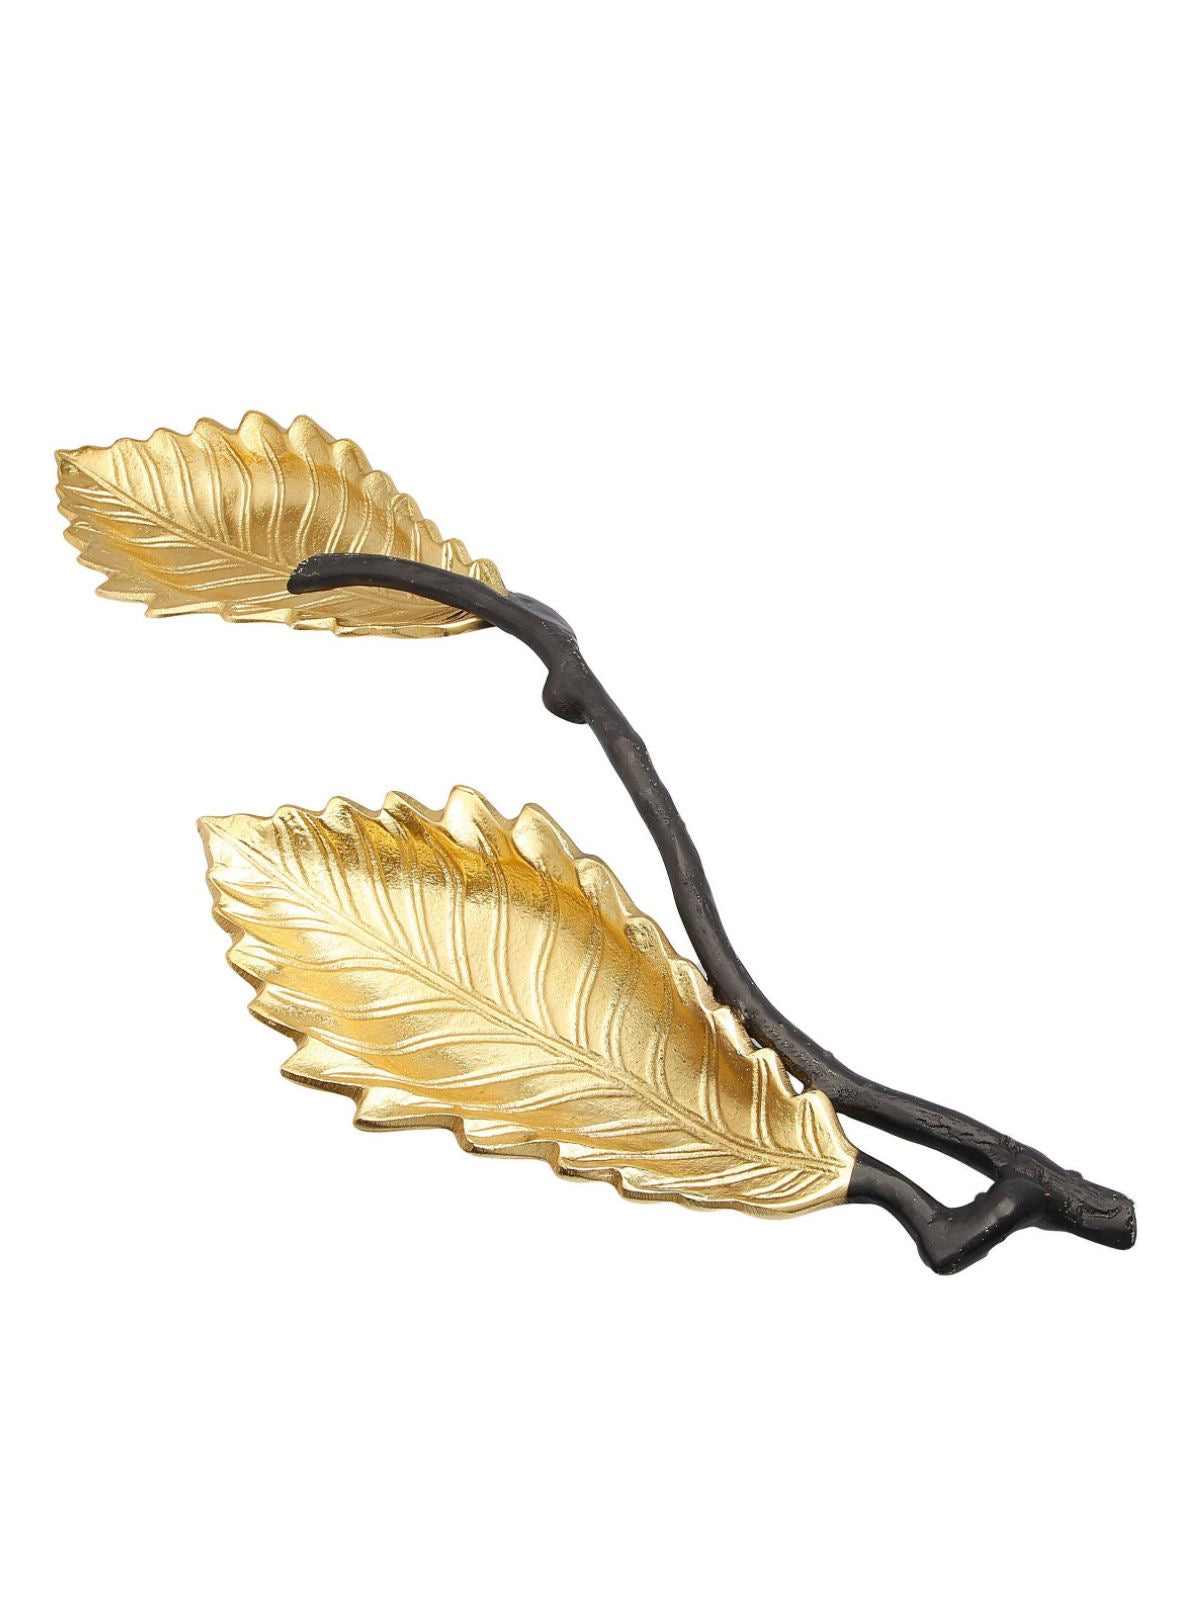 The Due Livelli Gold Dish with Black Branches is artfully crafted from quality stainless steel and 100% food safe. This Elegant piece is Available at KYA Home Decor